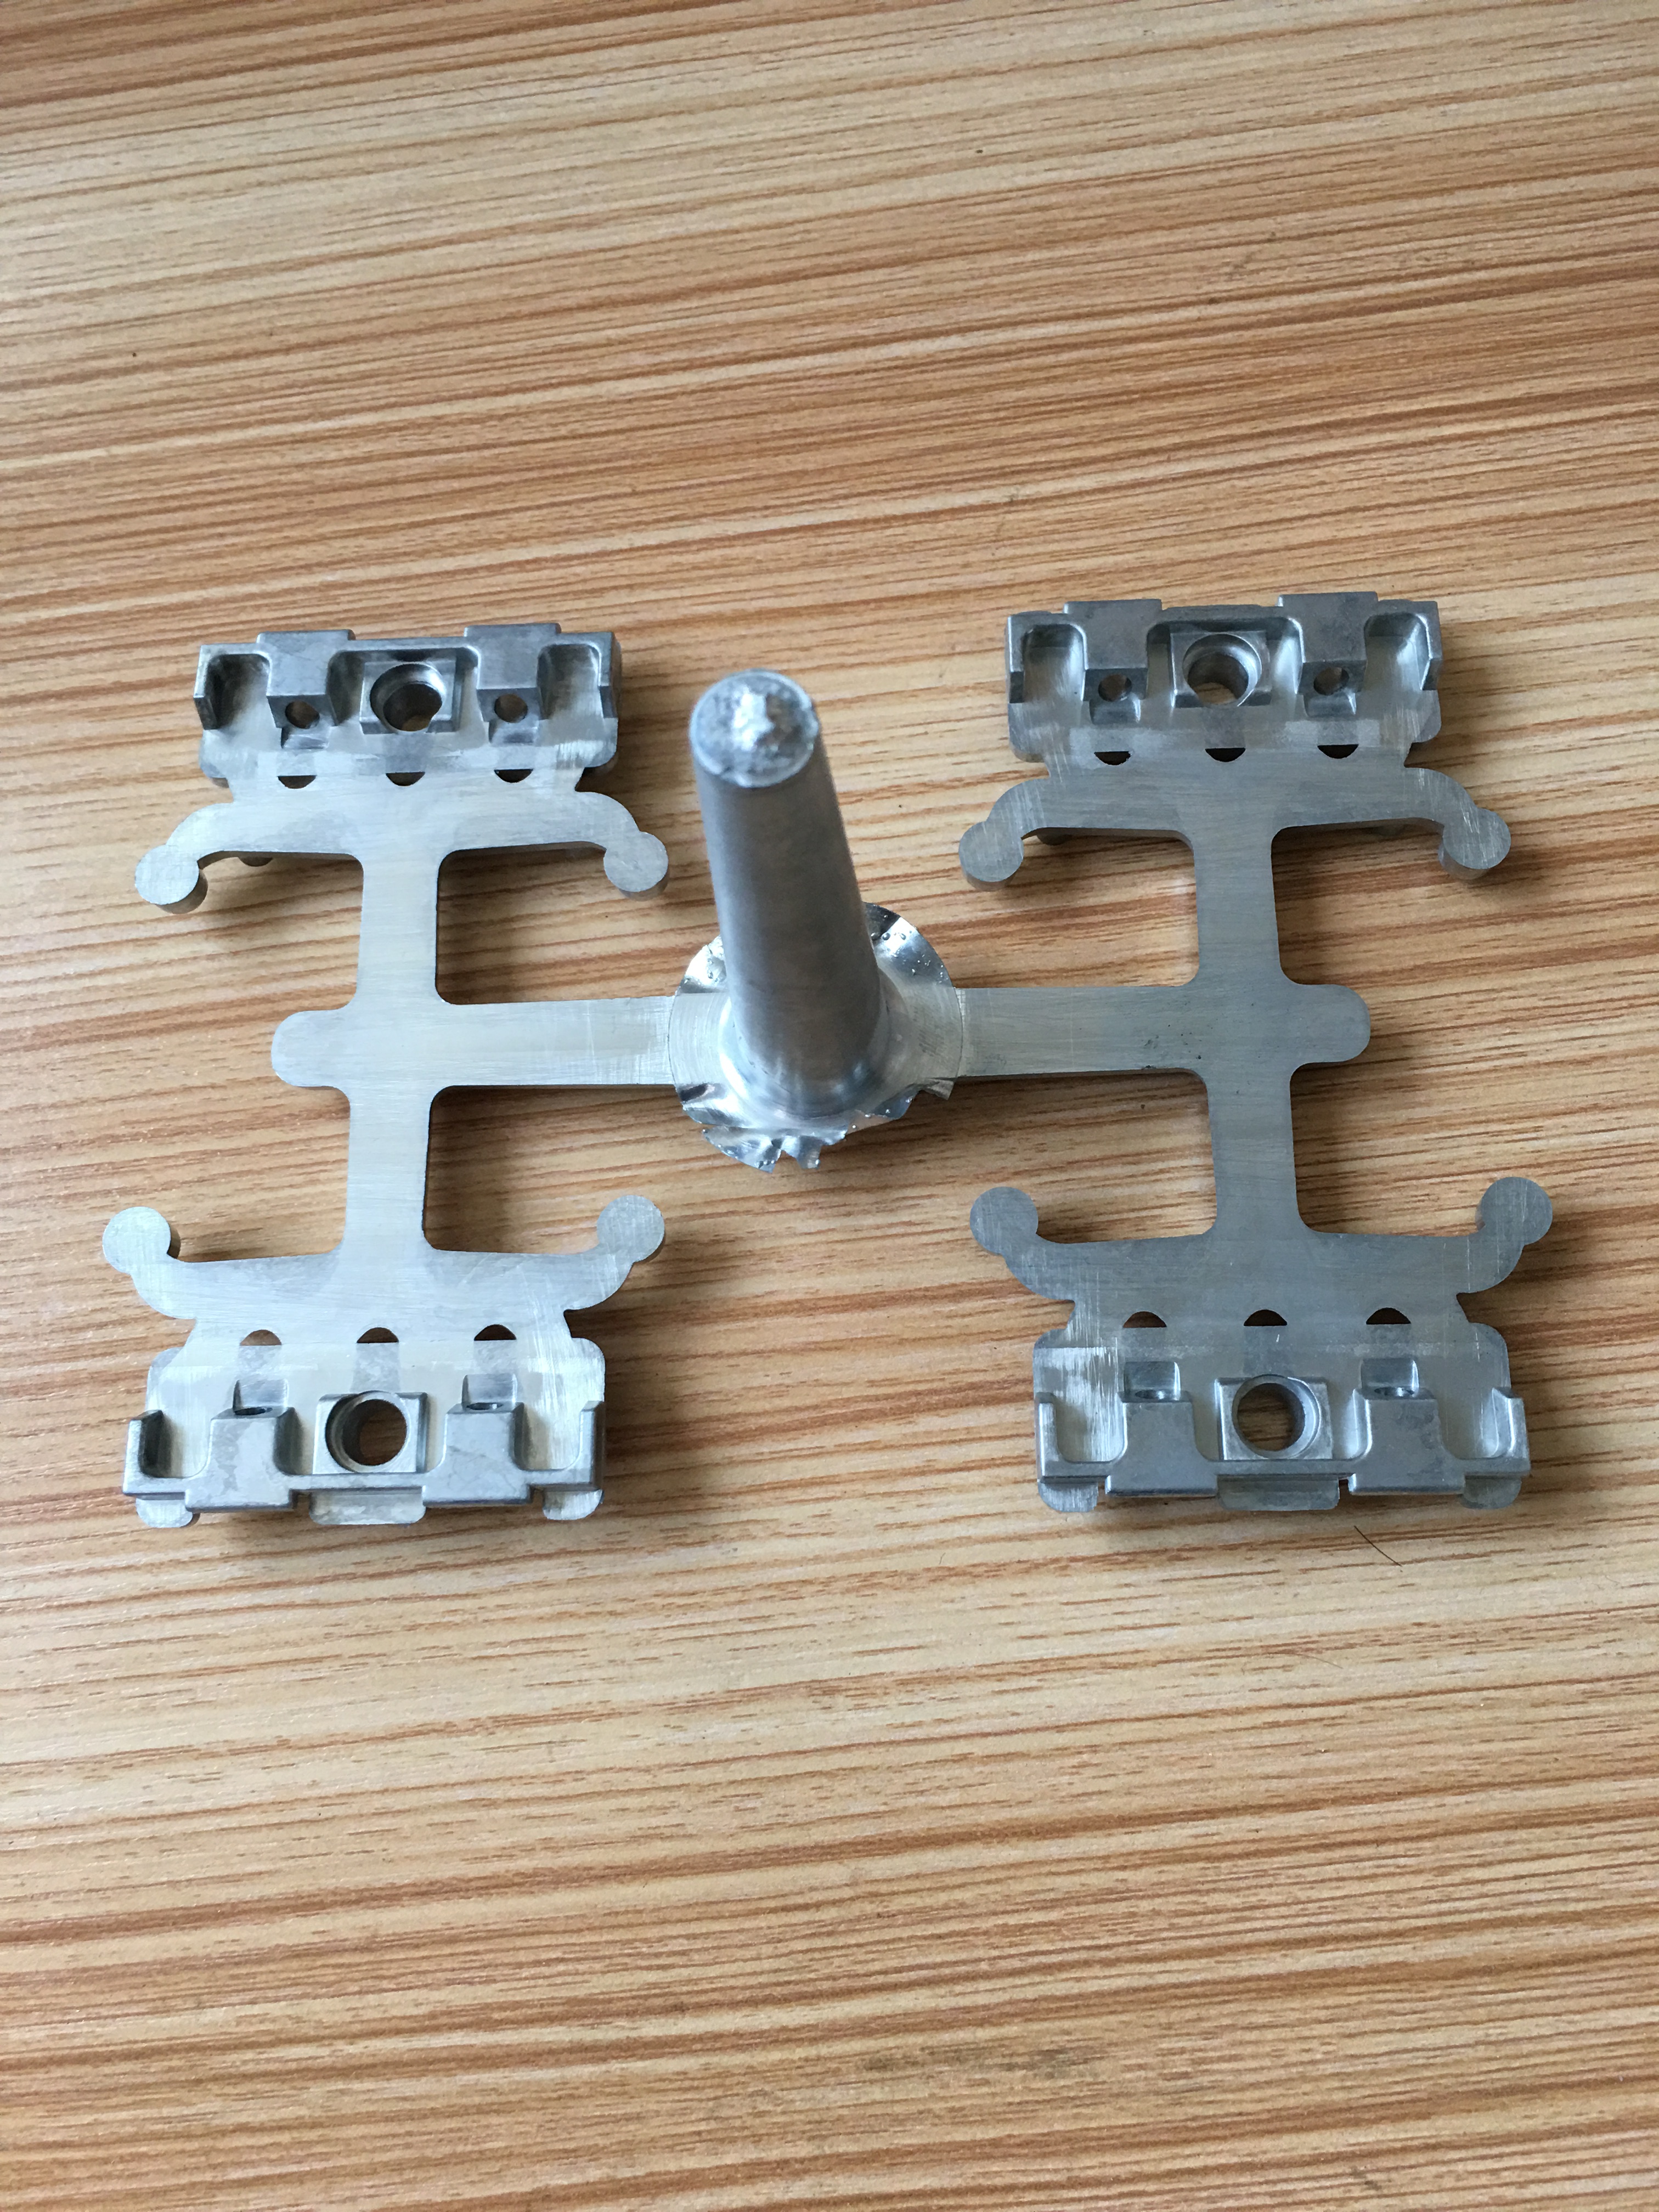 As a plastic mold manufacturers china, what role does technology play in mold manufacturing?